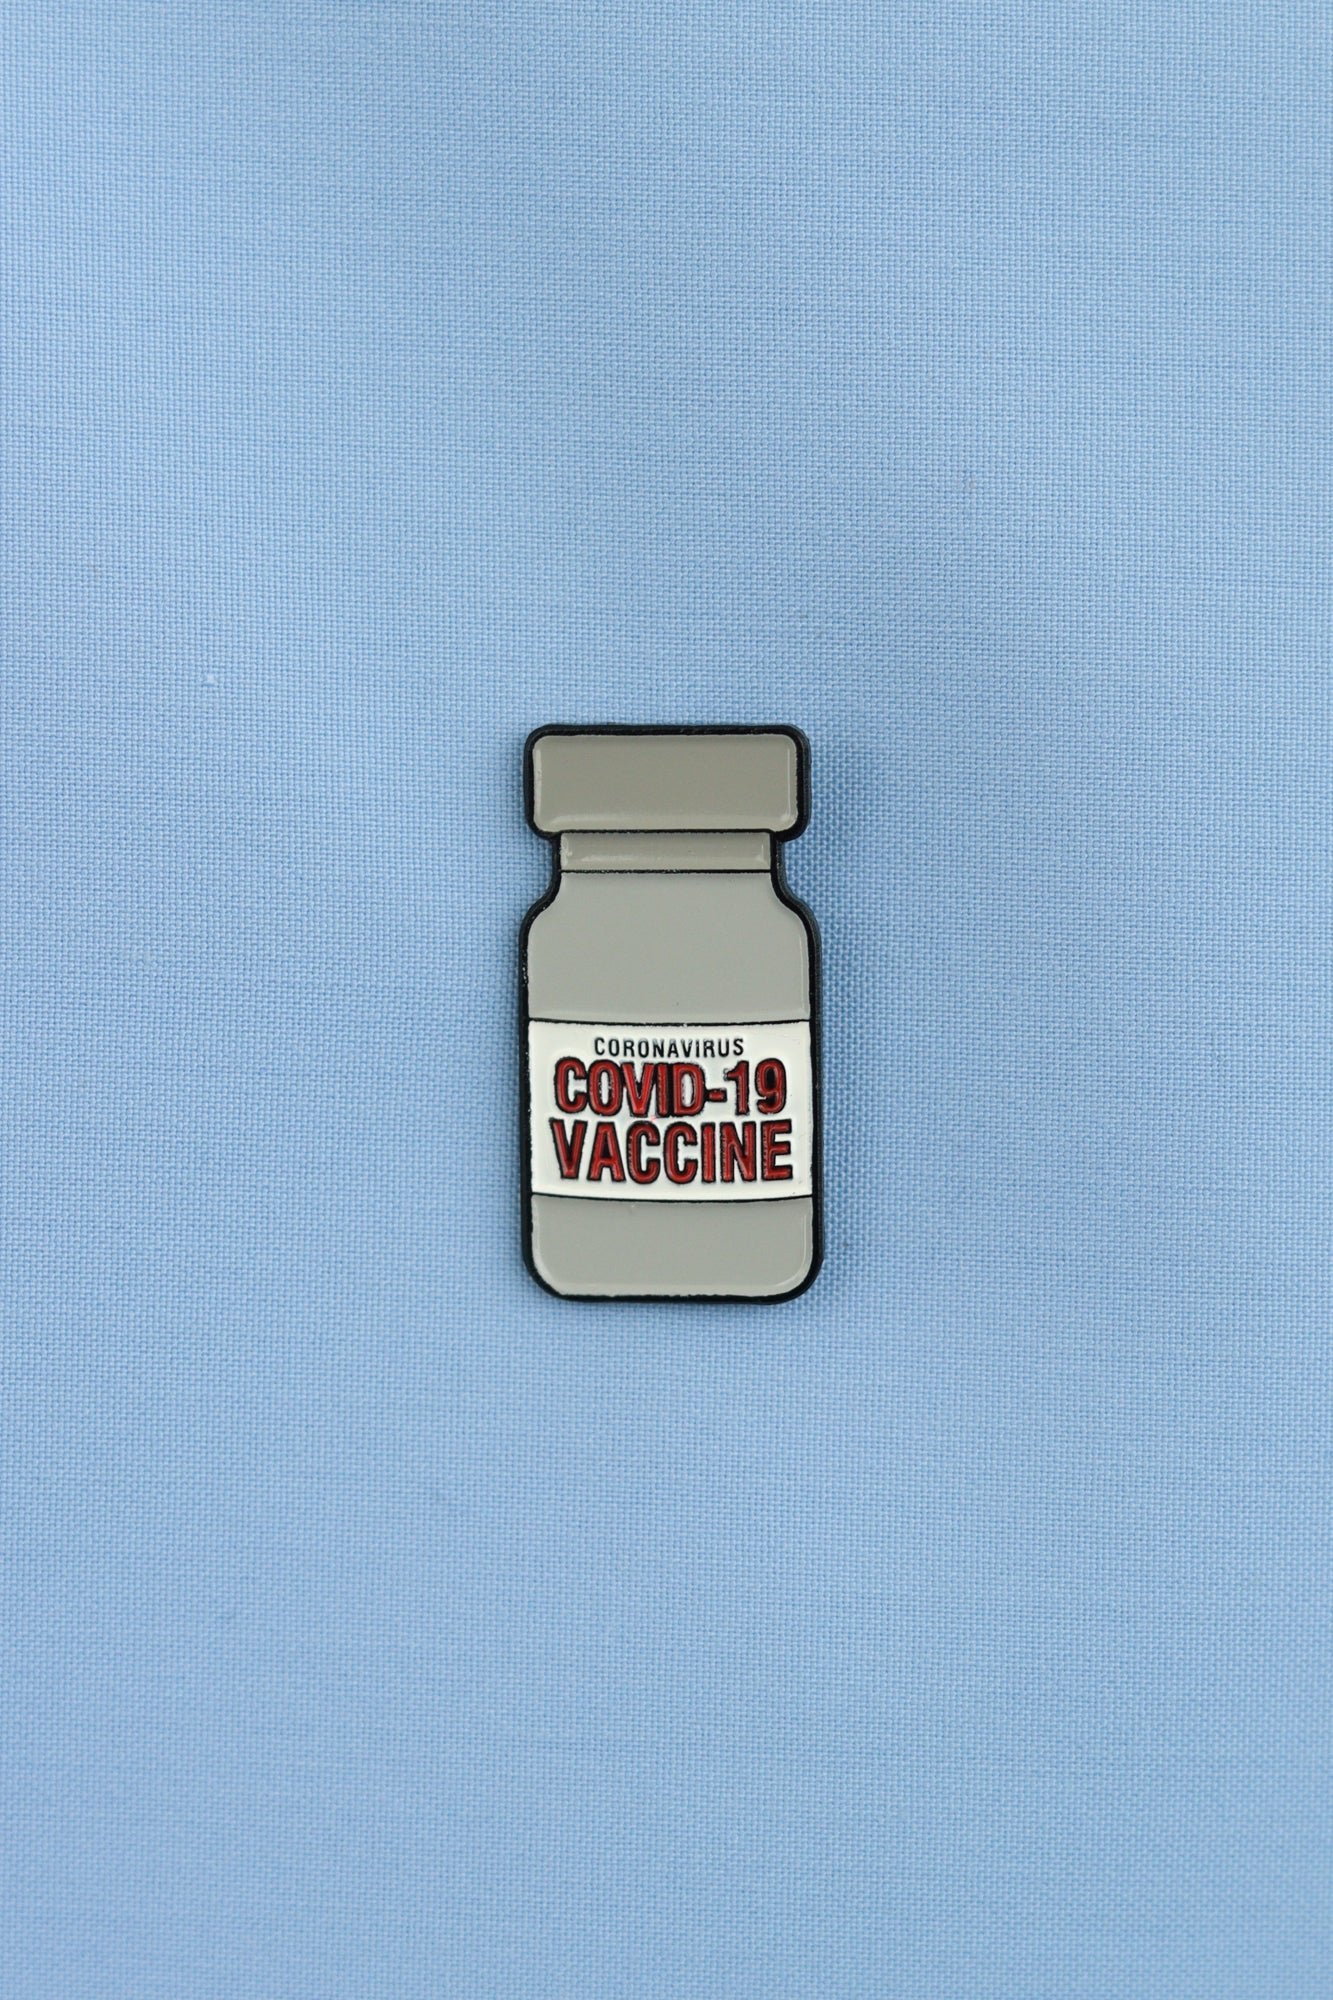 products-covid19vaccine-880608-jpg